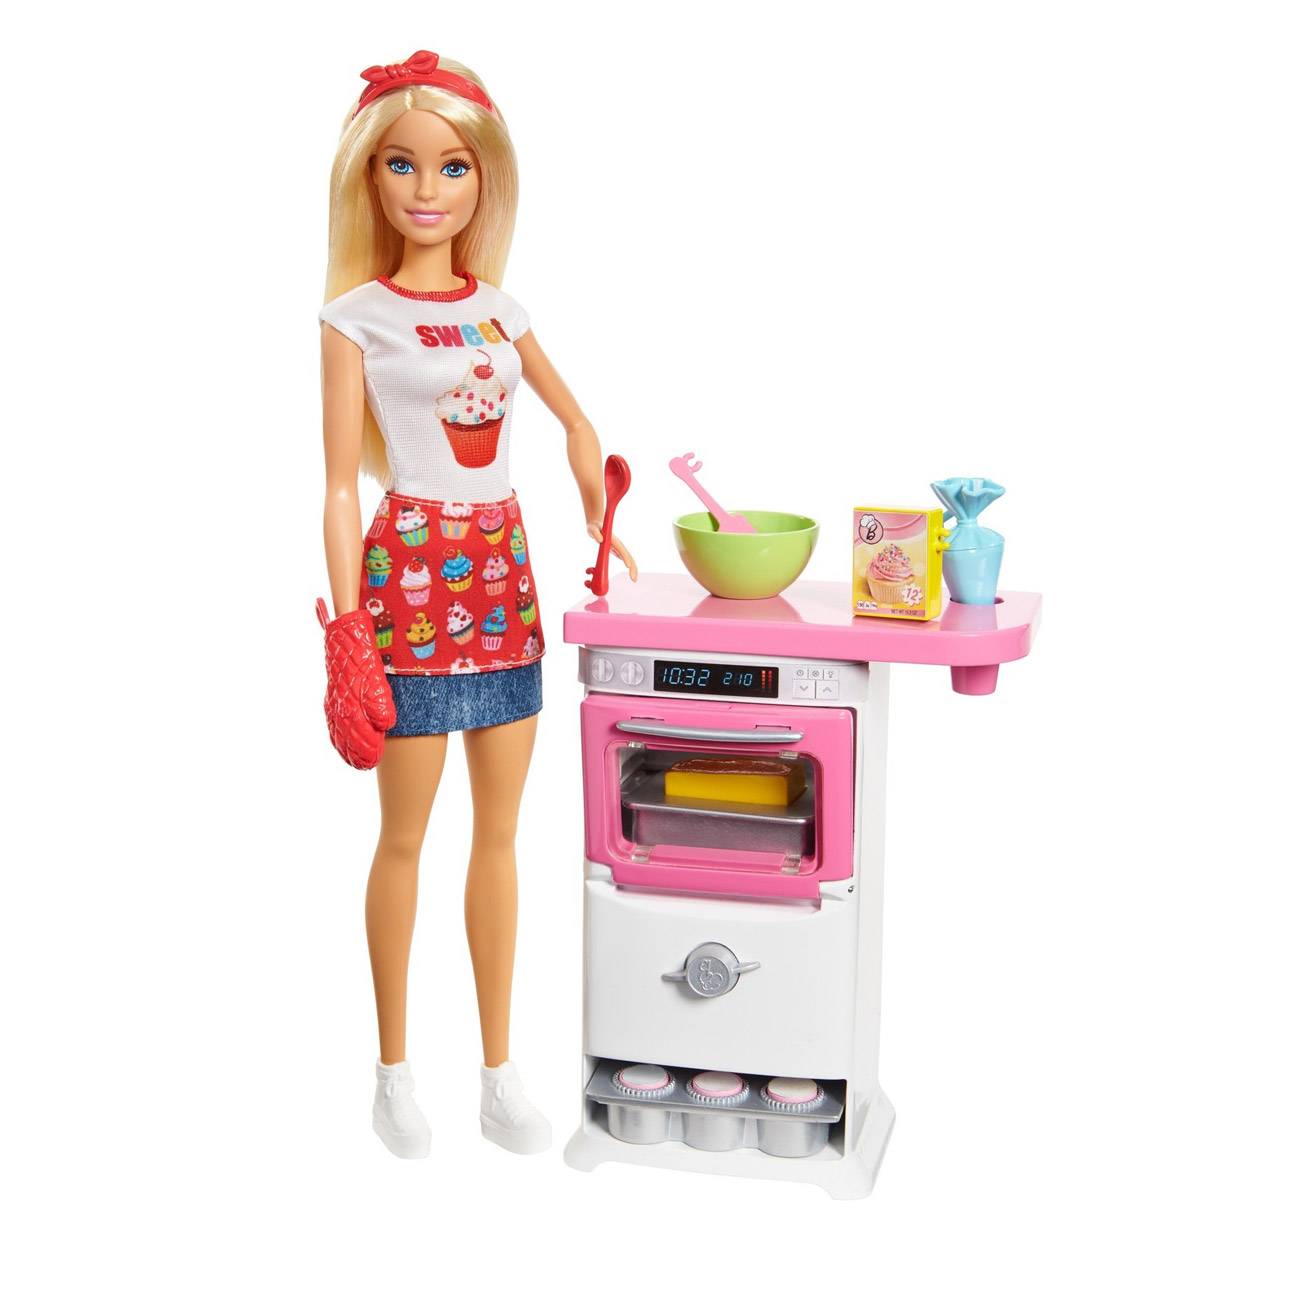 BAKERY CHEF DOLL AND PLAYSET